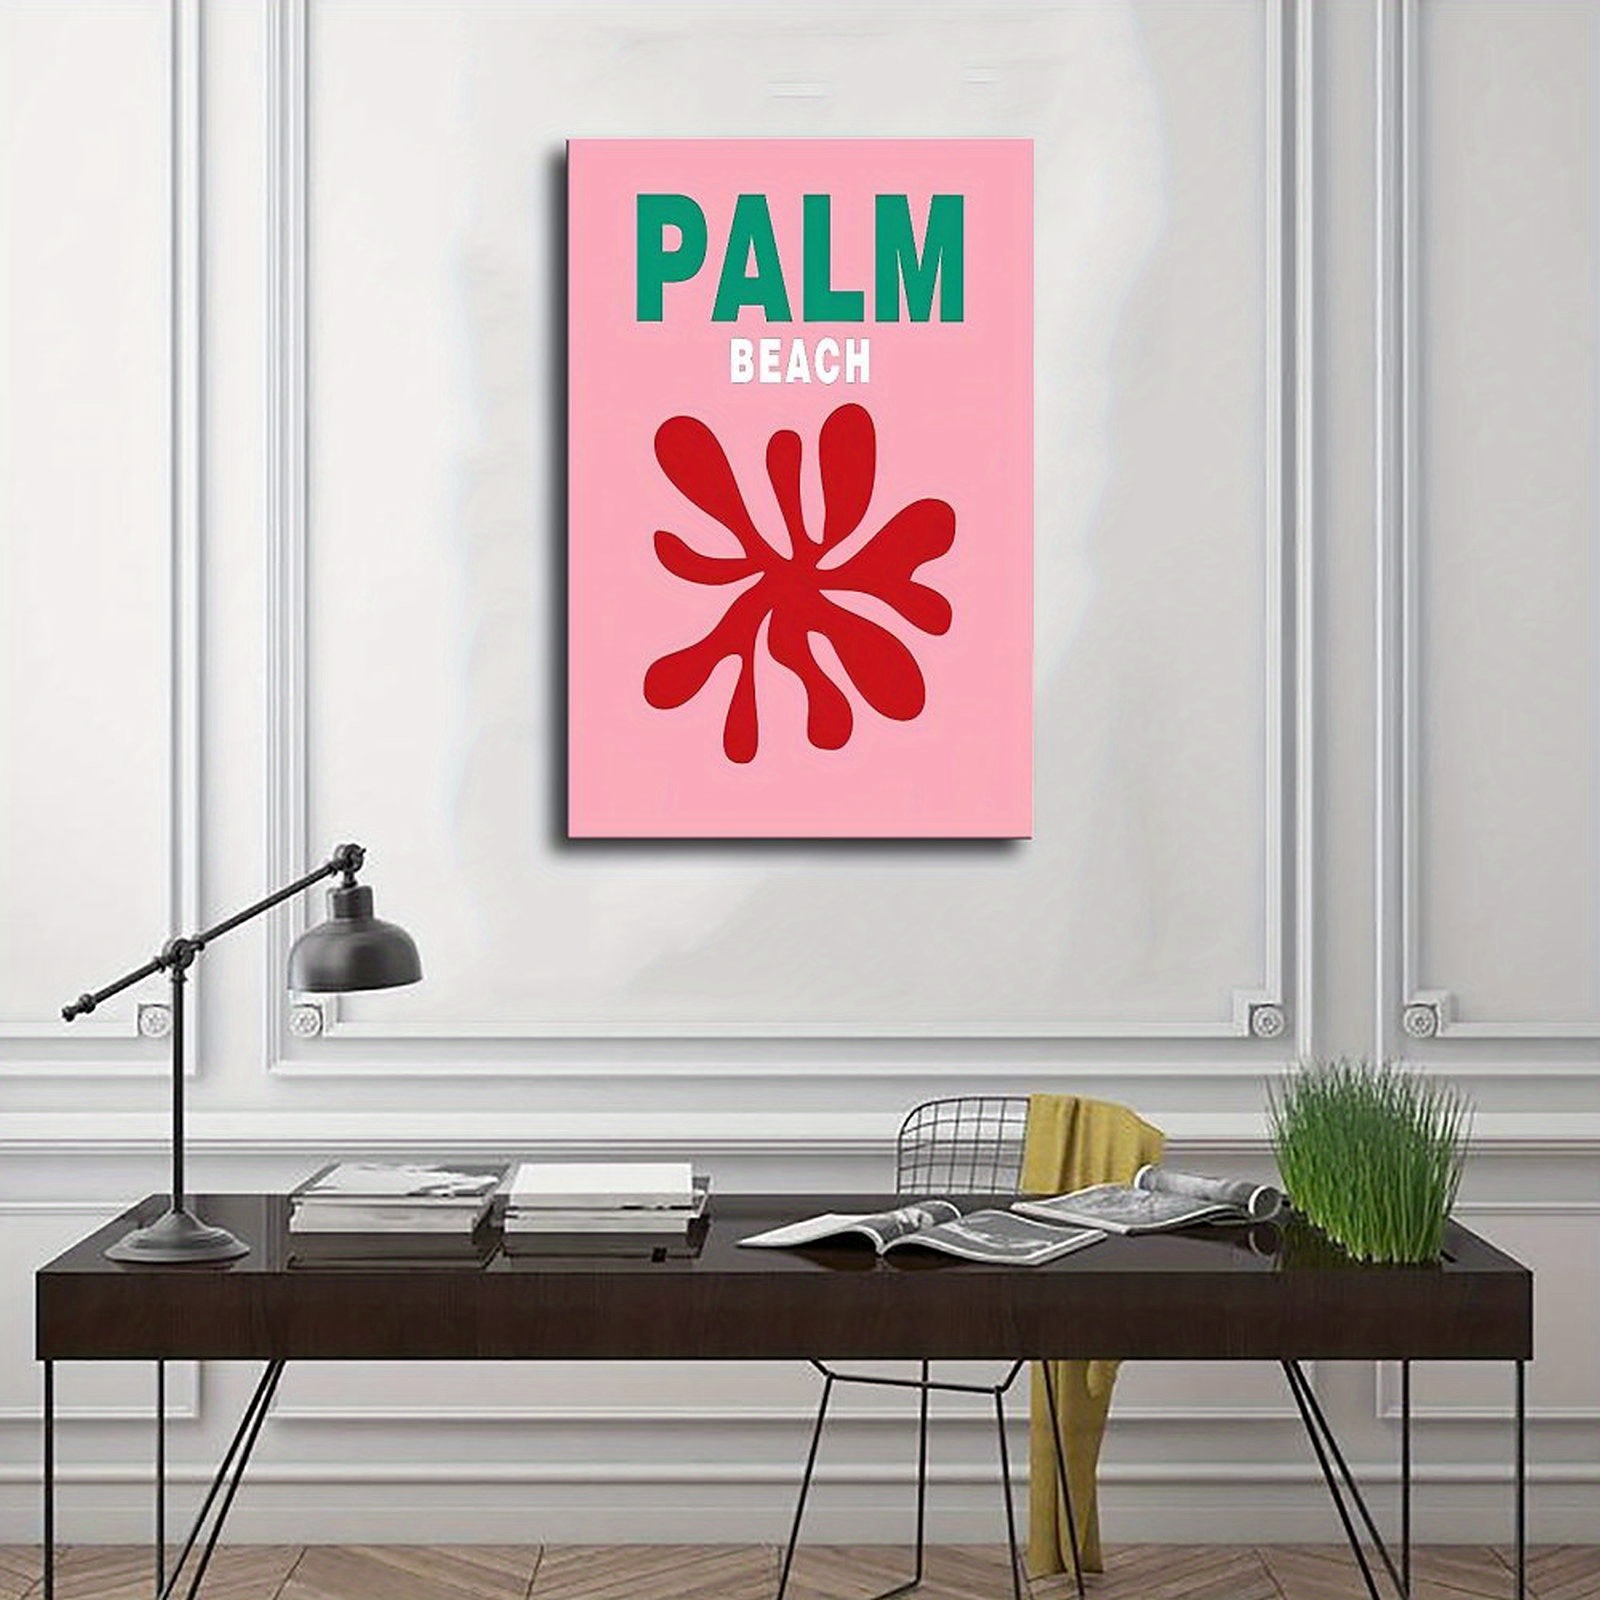 Haus and Hues Pink Poster Preppy Wall Art - Cute Posters for Room